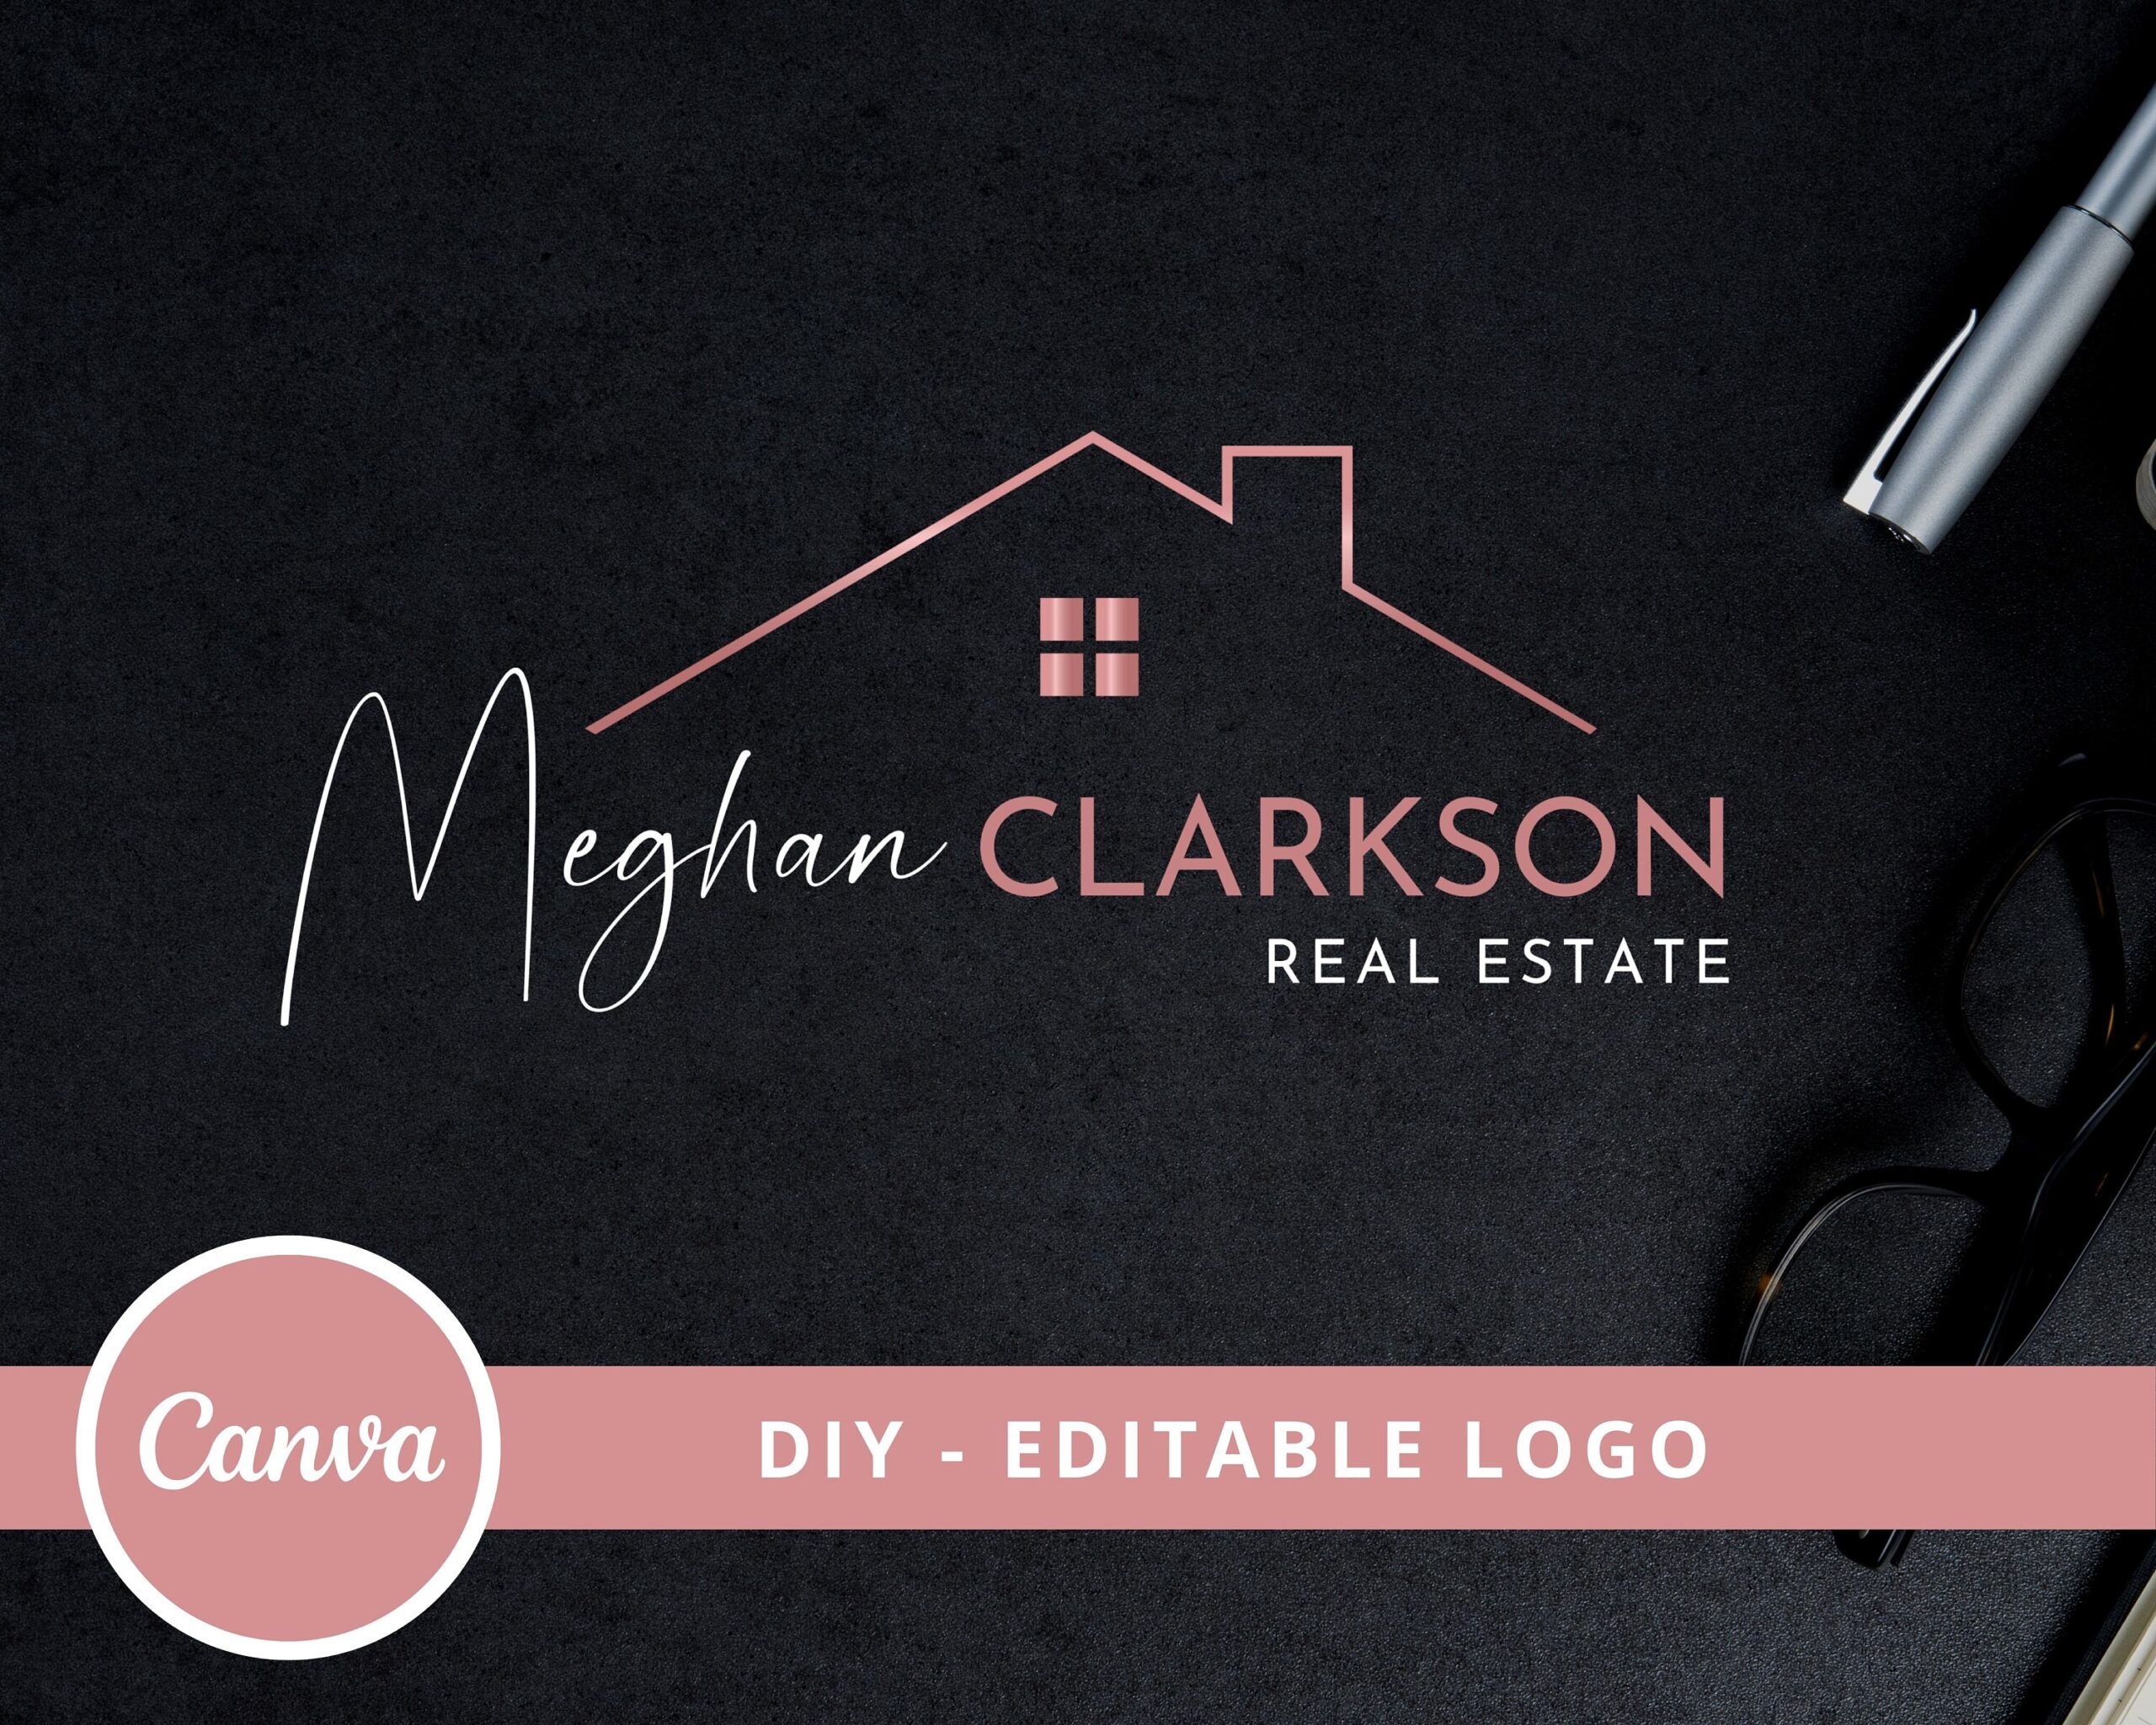 Editable House Logo Design for Real Estate Agents, DIY Rose Gold Template in Canva, Realtor Logo, Signature Logo, Edit Now, Instant Access